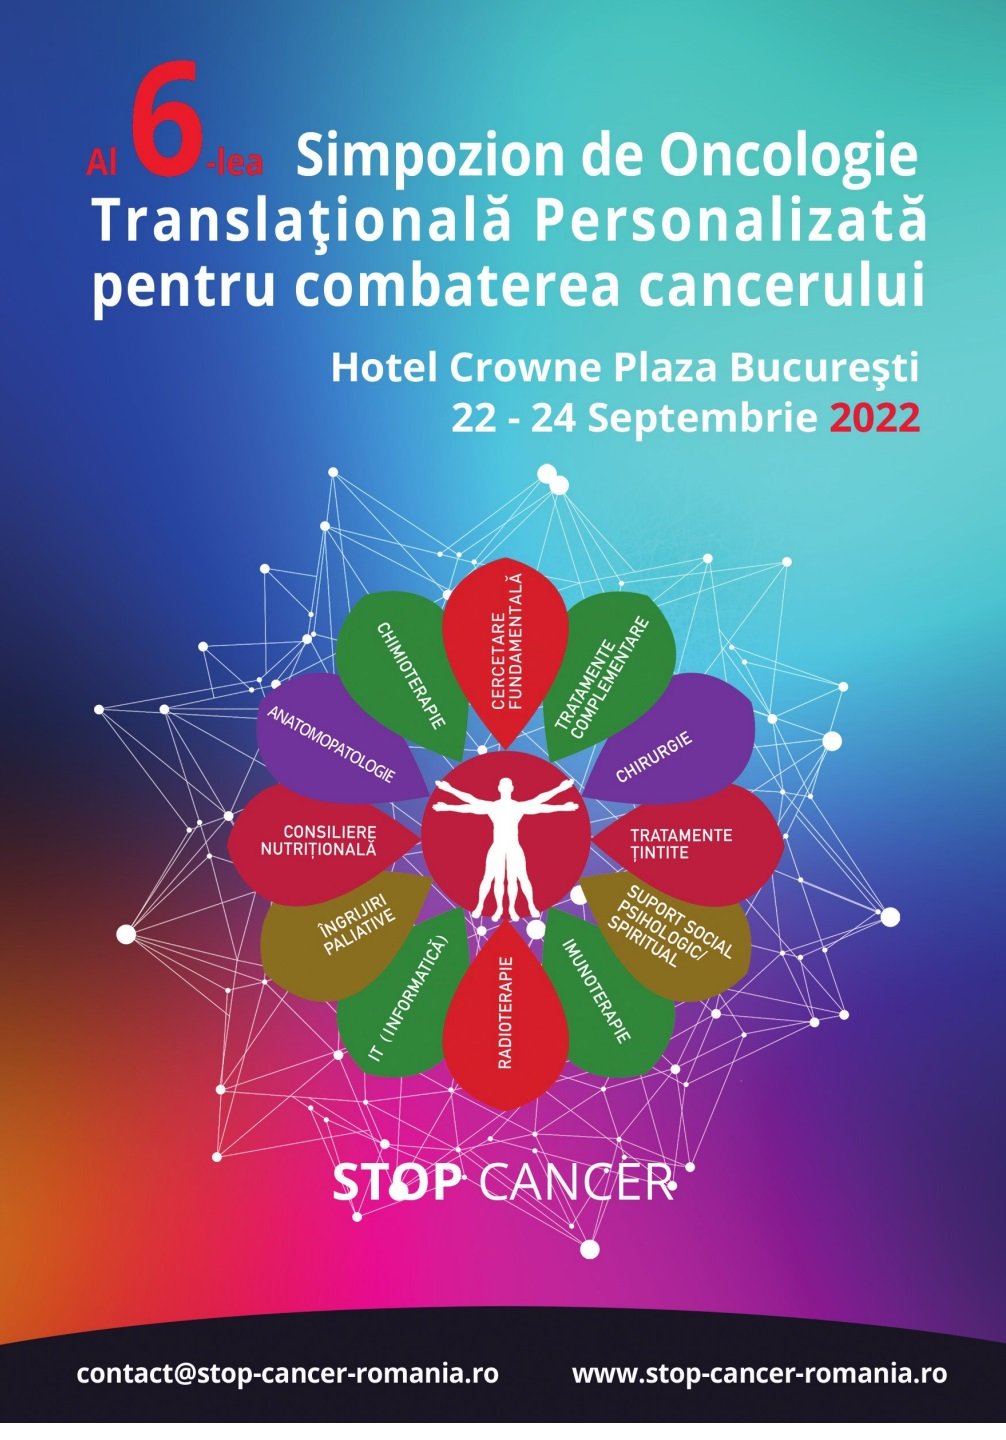 Presentation on the "Expansion Pathology in Chronic Diseases" at the STOP Cancer Conference in Bucharest